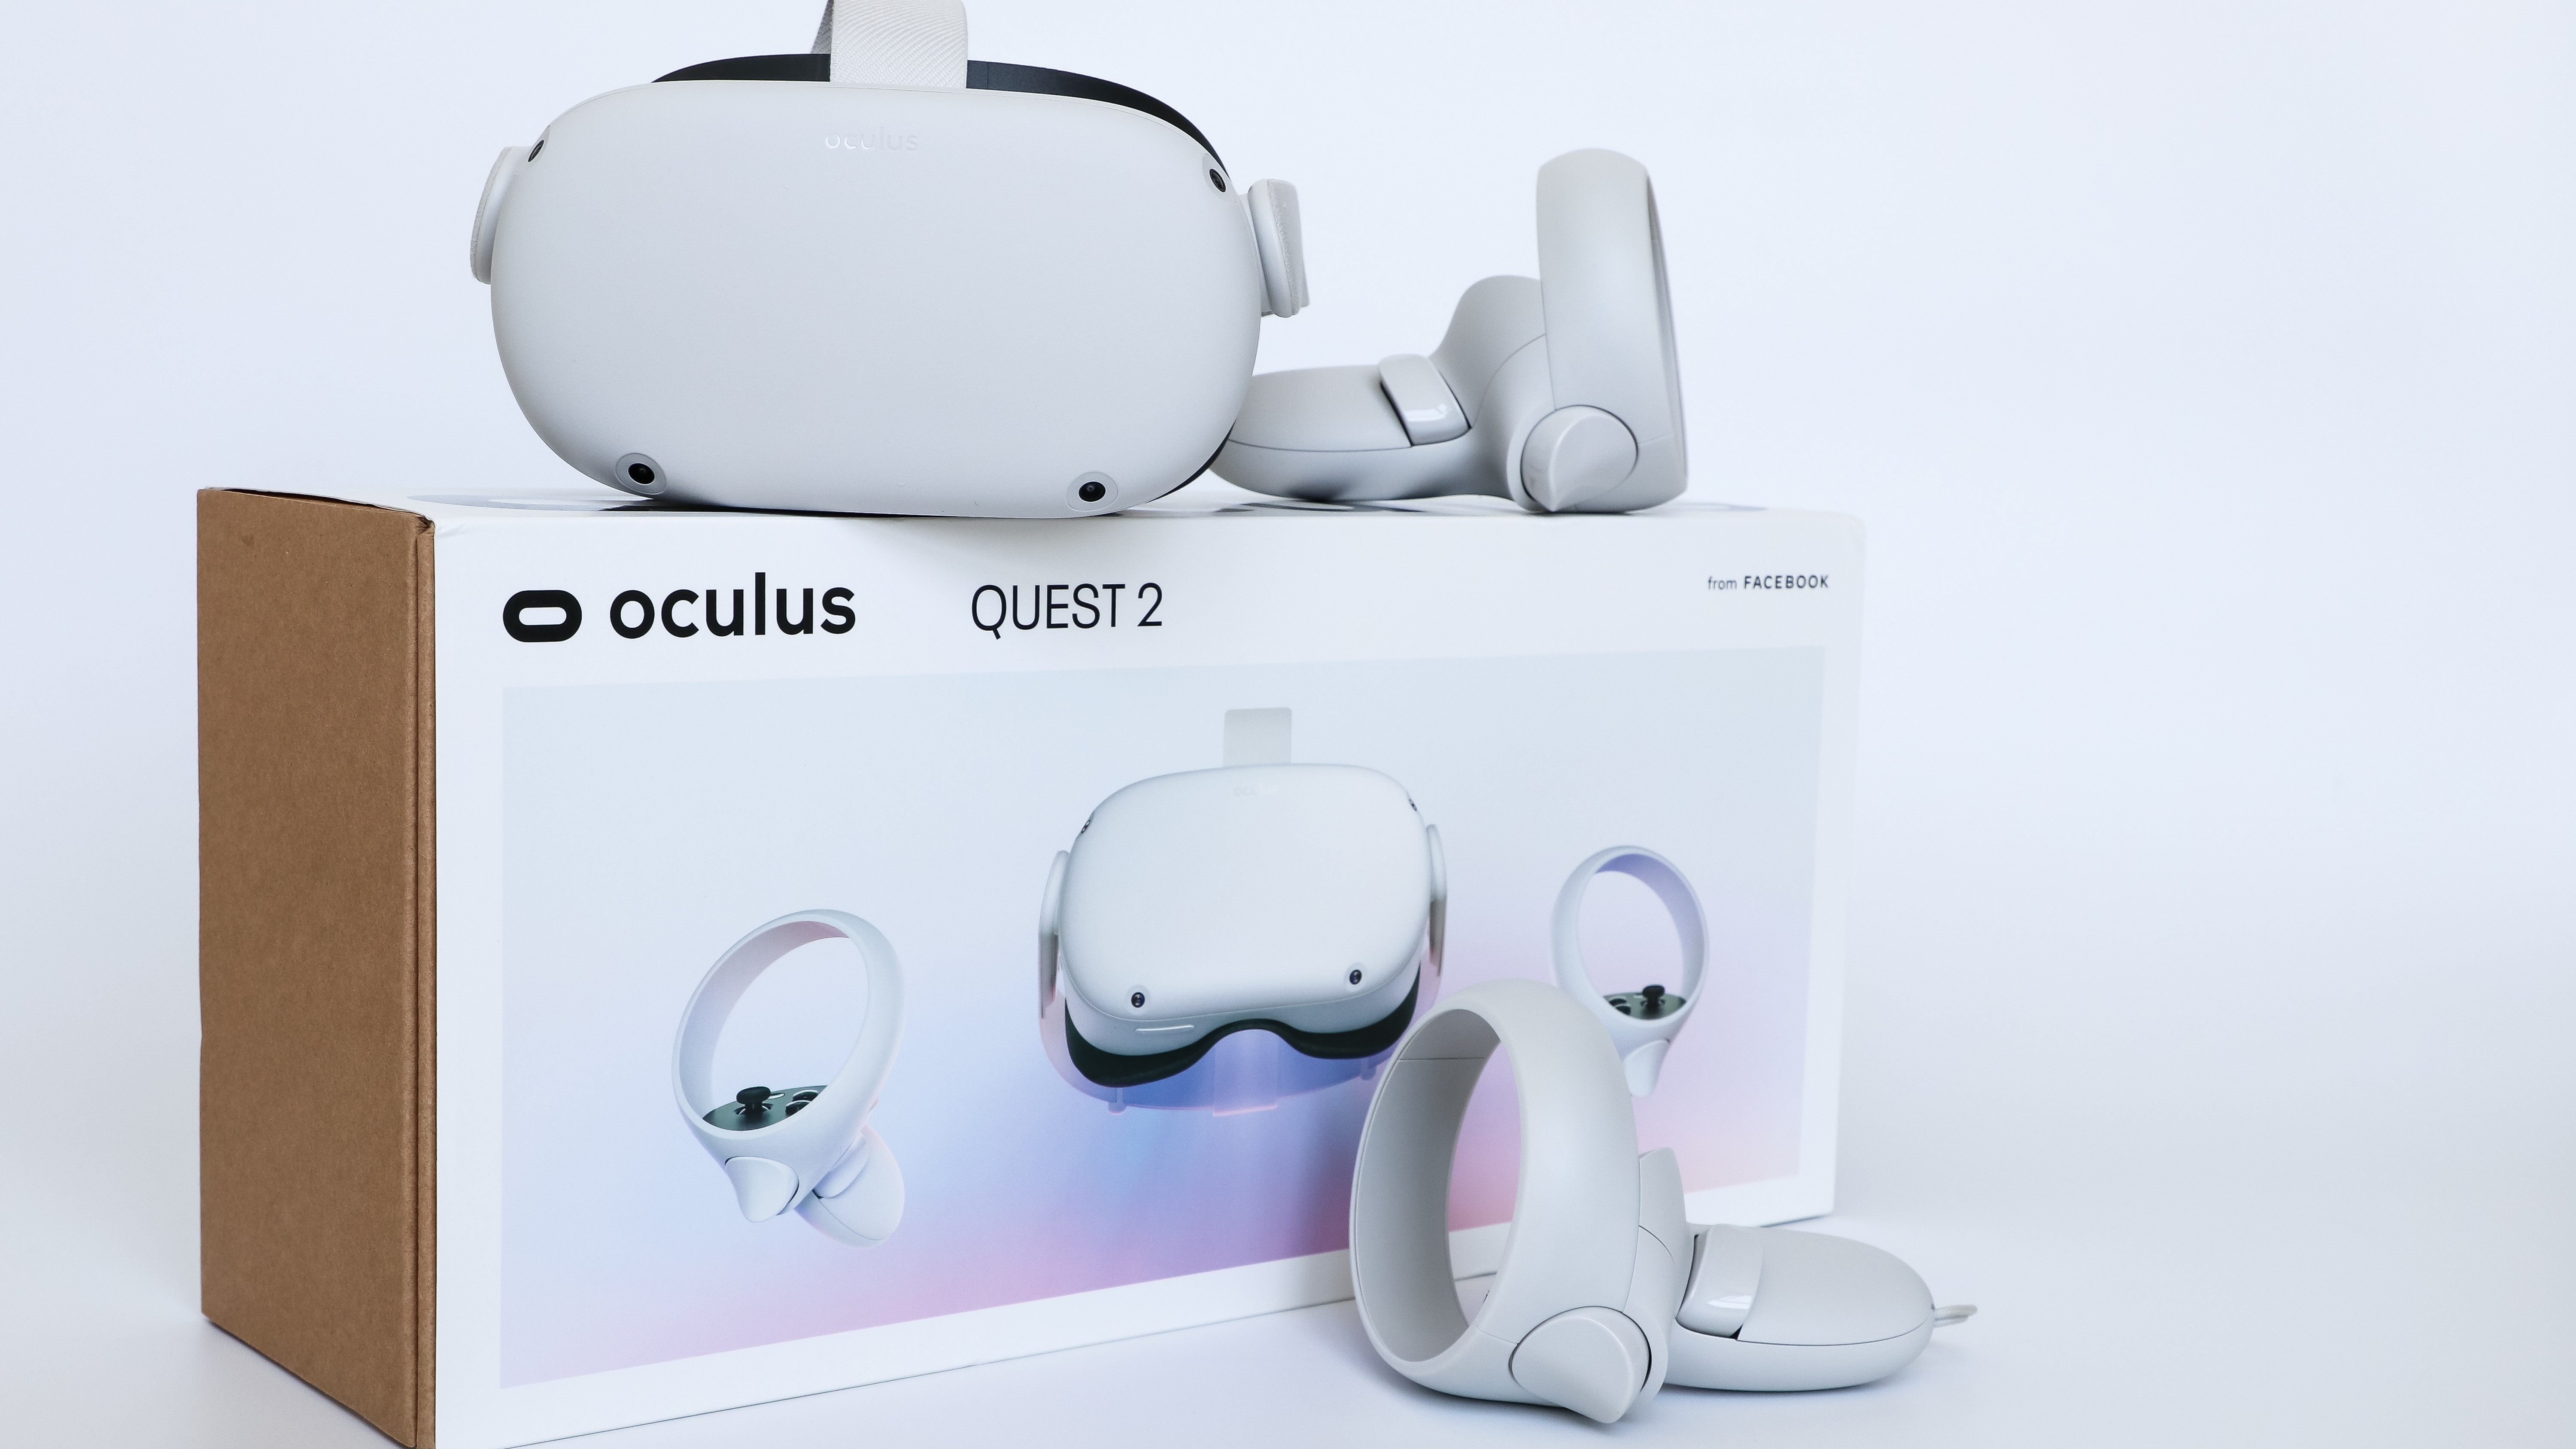 The Oculus Quest 2 headset sat on top of its box and next to its controllers